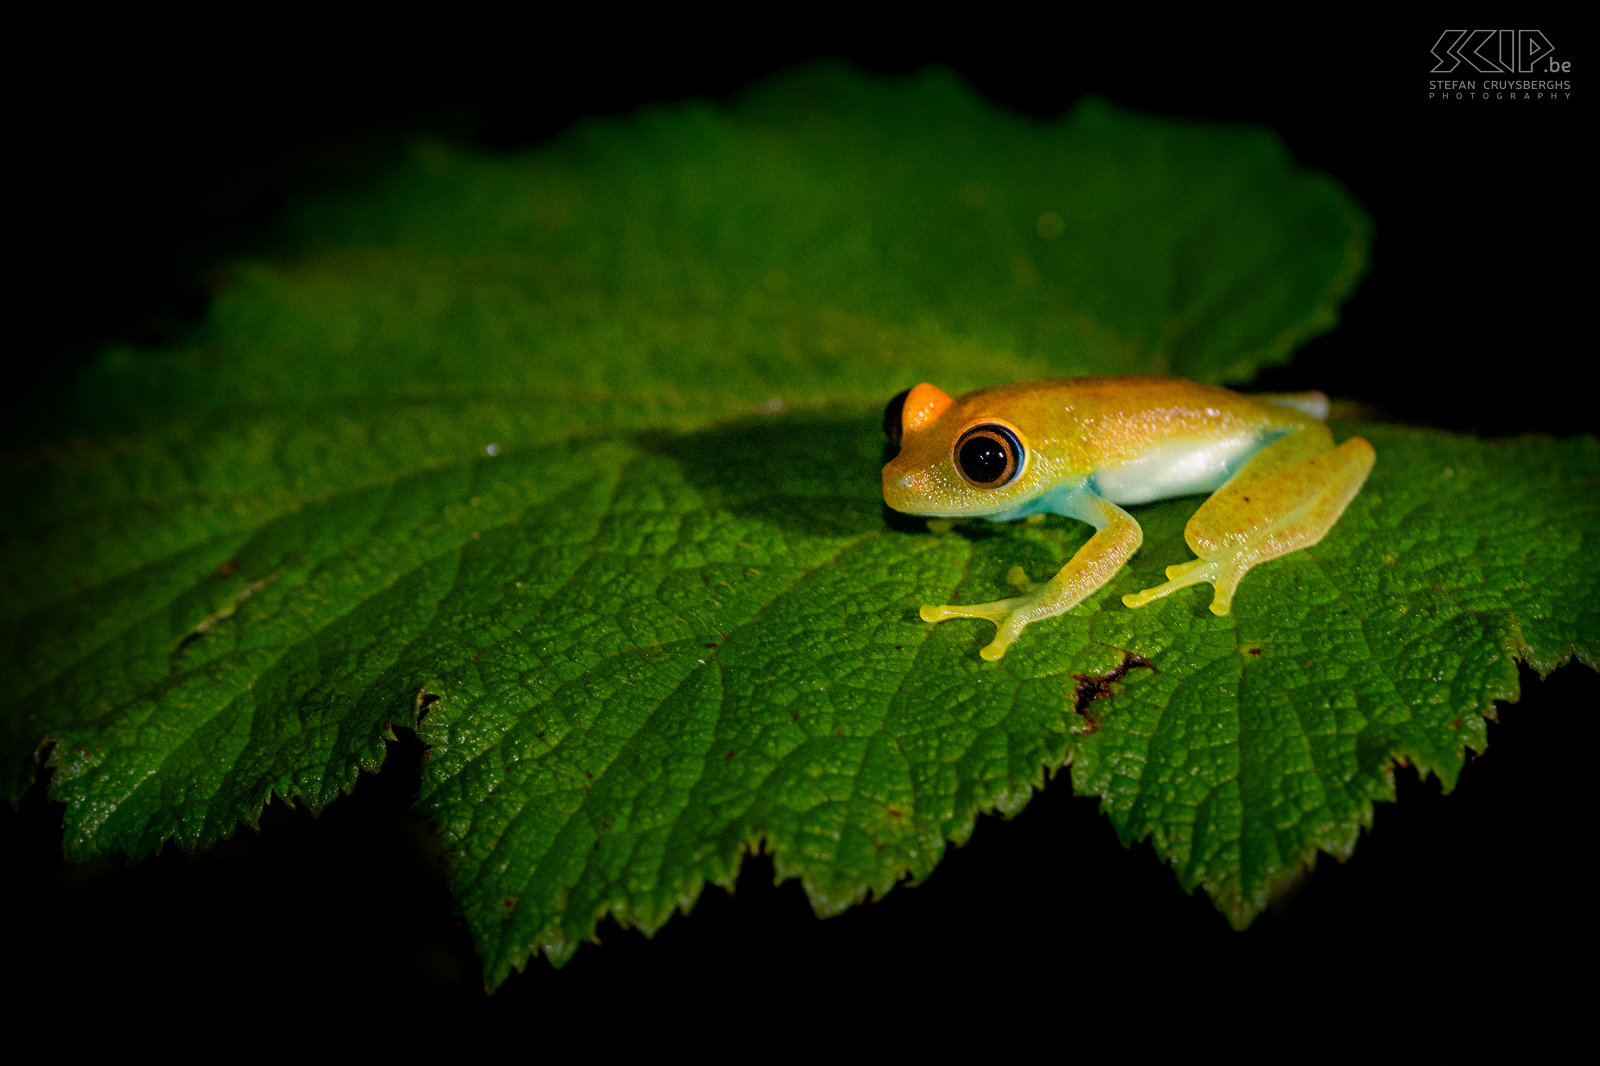 Andasibe - Green bright-eyed frog The green bright-eyed frog (Boophis viridis) is 2 to 3,5 cm long, endemic to Madagascar and it has the ability to change its color from green to more reddish-brown. Stefan Cruysberghs